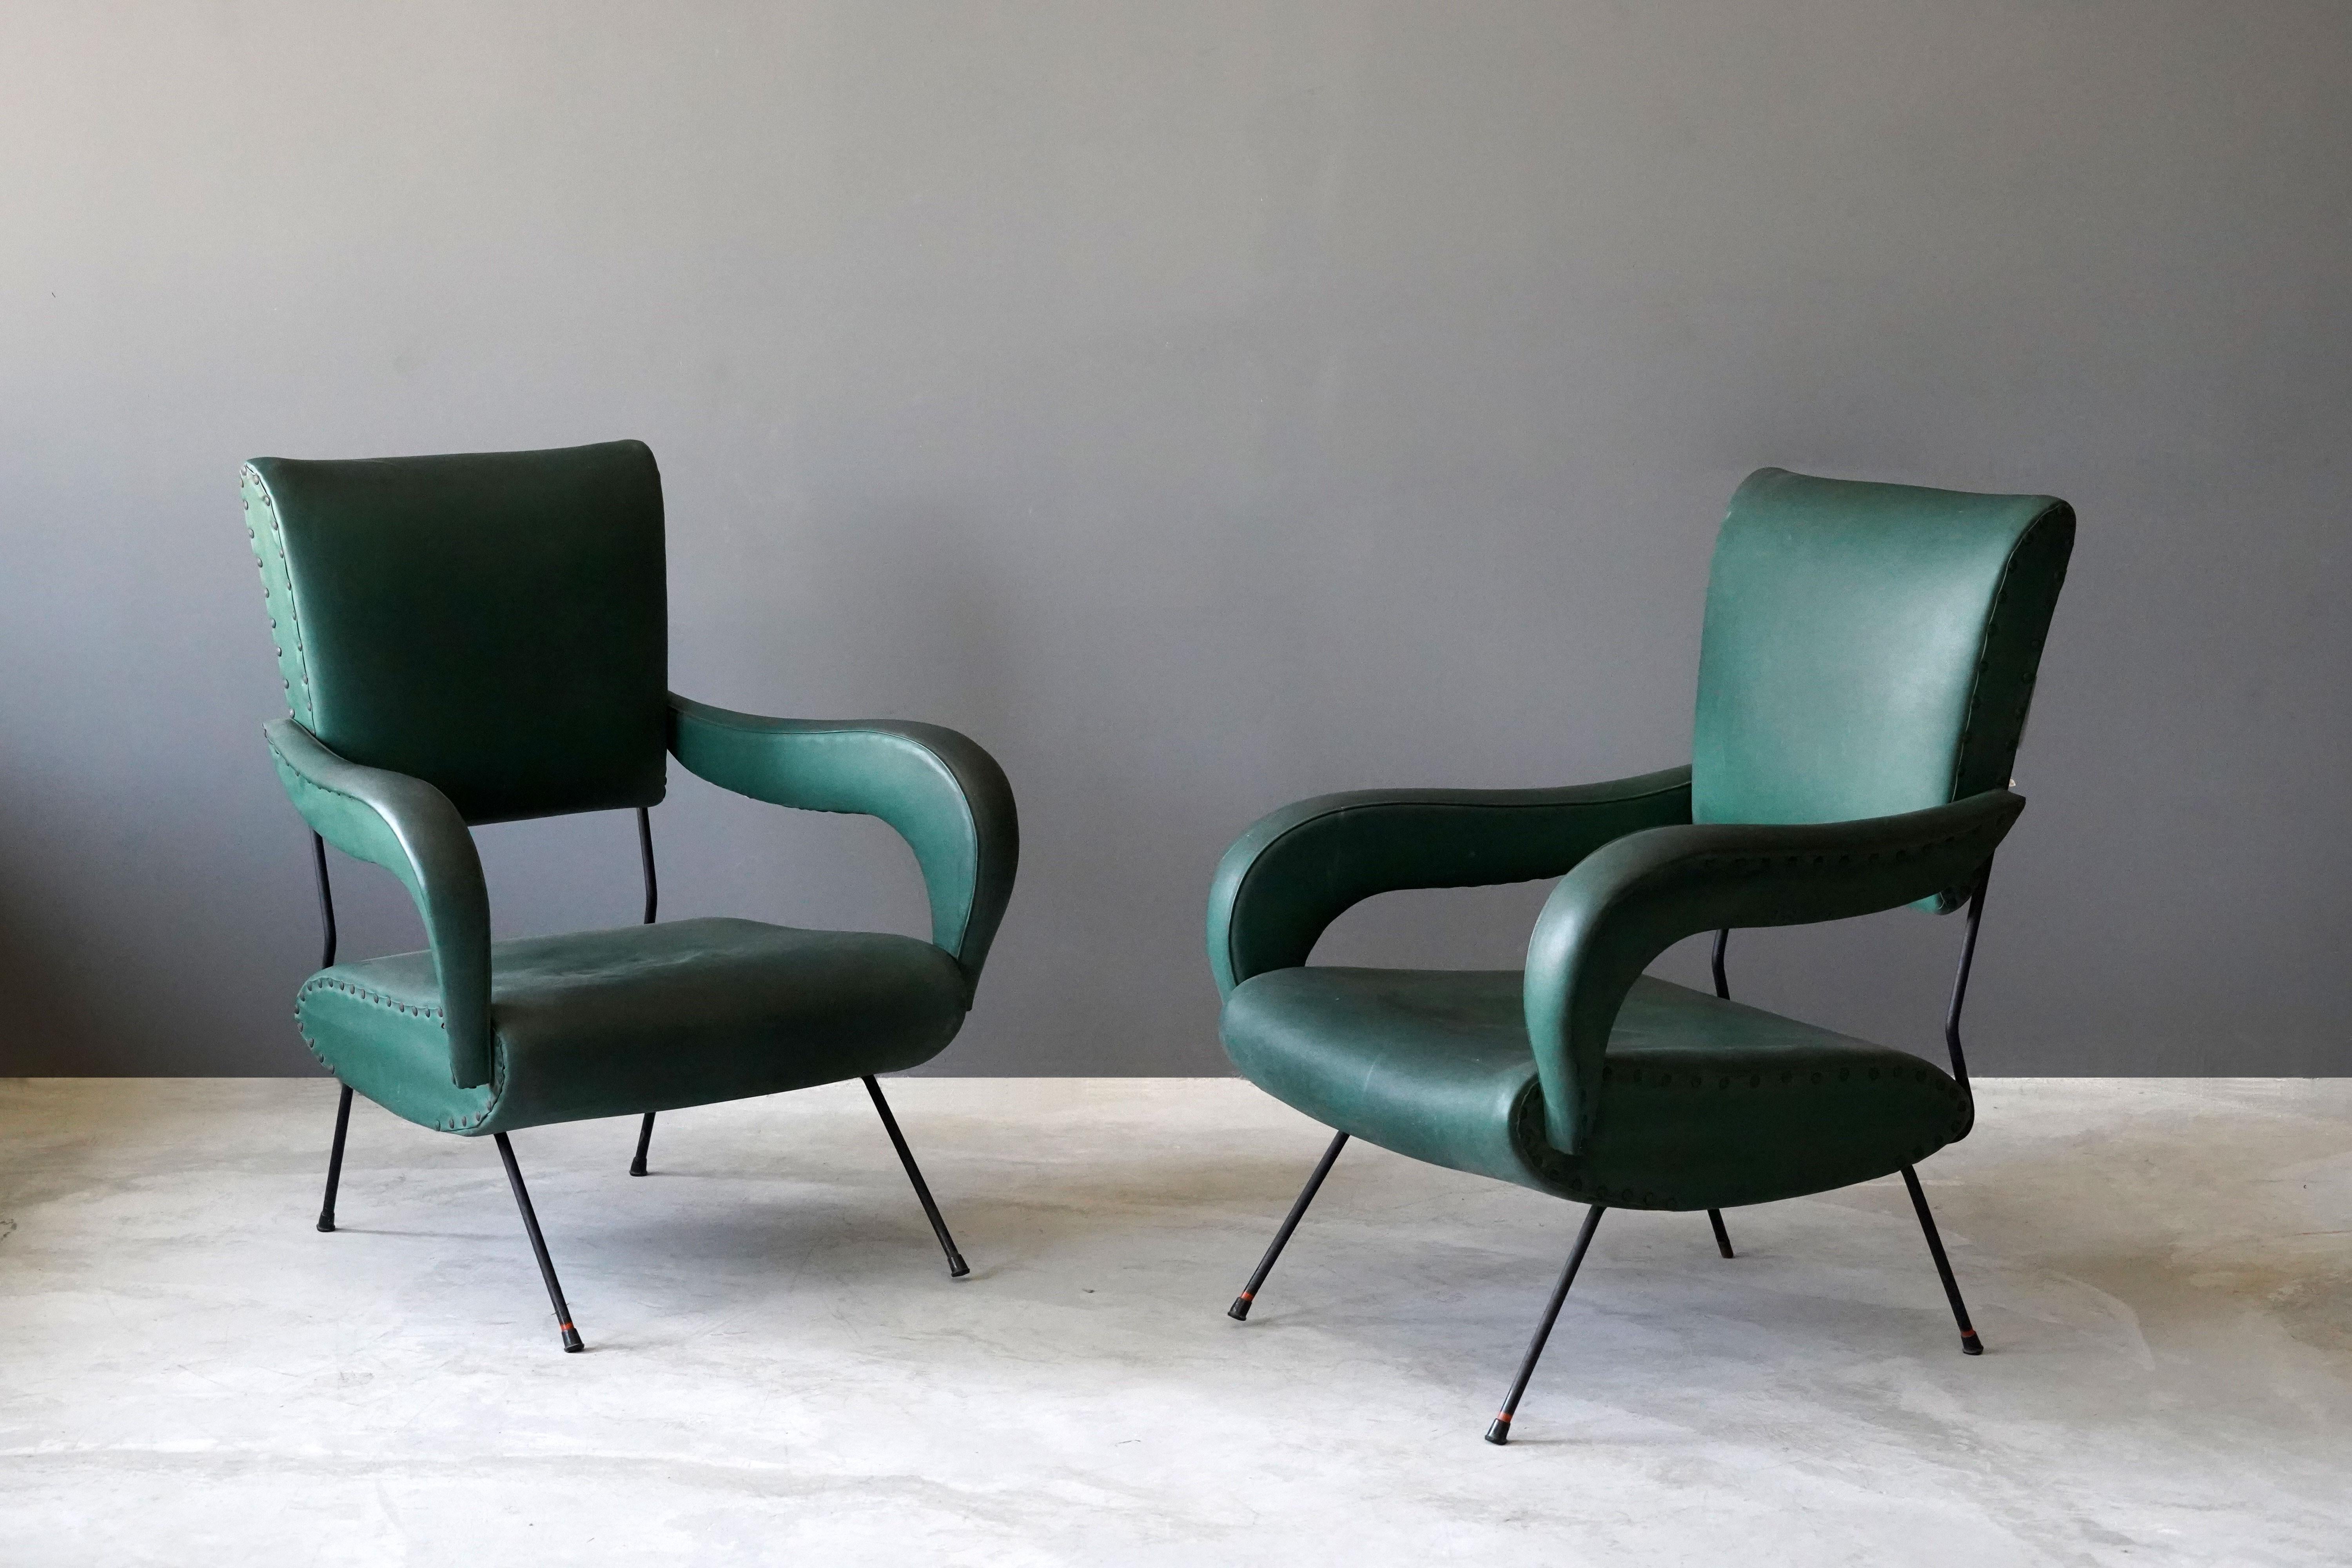 A pair of organic lounge chairs / arm chairs. Designed and produced in Italy, 1950s. 

Other designers of the period include Carlo Mollino, Augusto Bozzi, Isamu Noguchi, Vladimir Kagan, and Gastone Rinaldi.